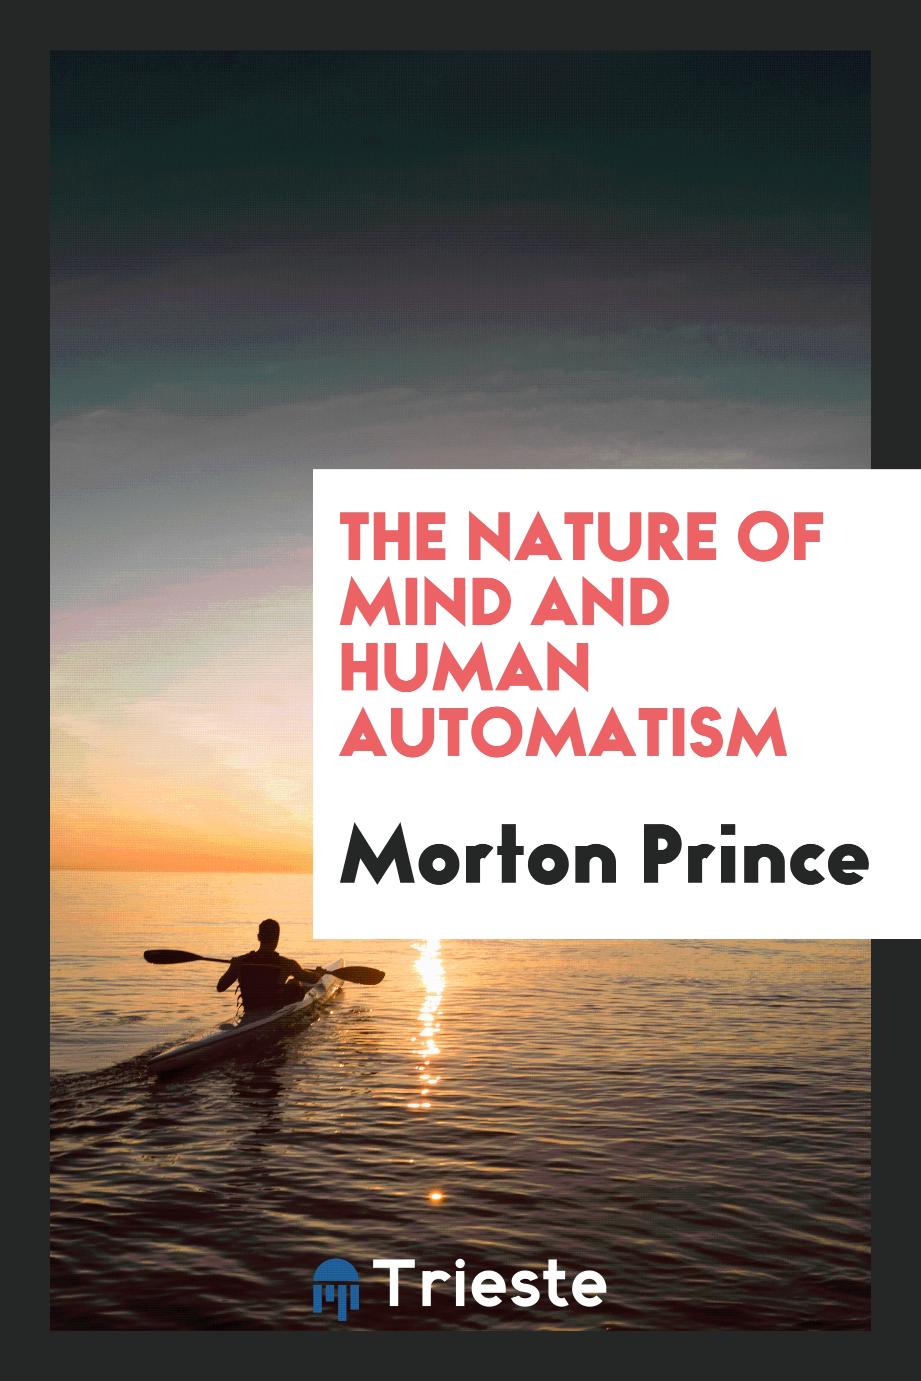 The nature of mind and human automatism